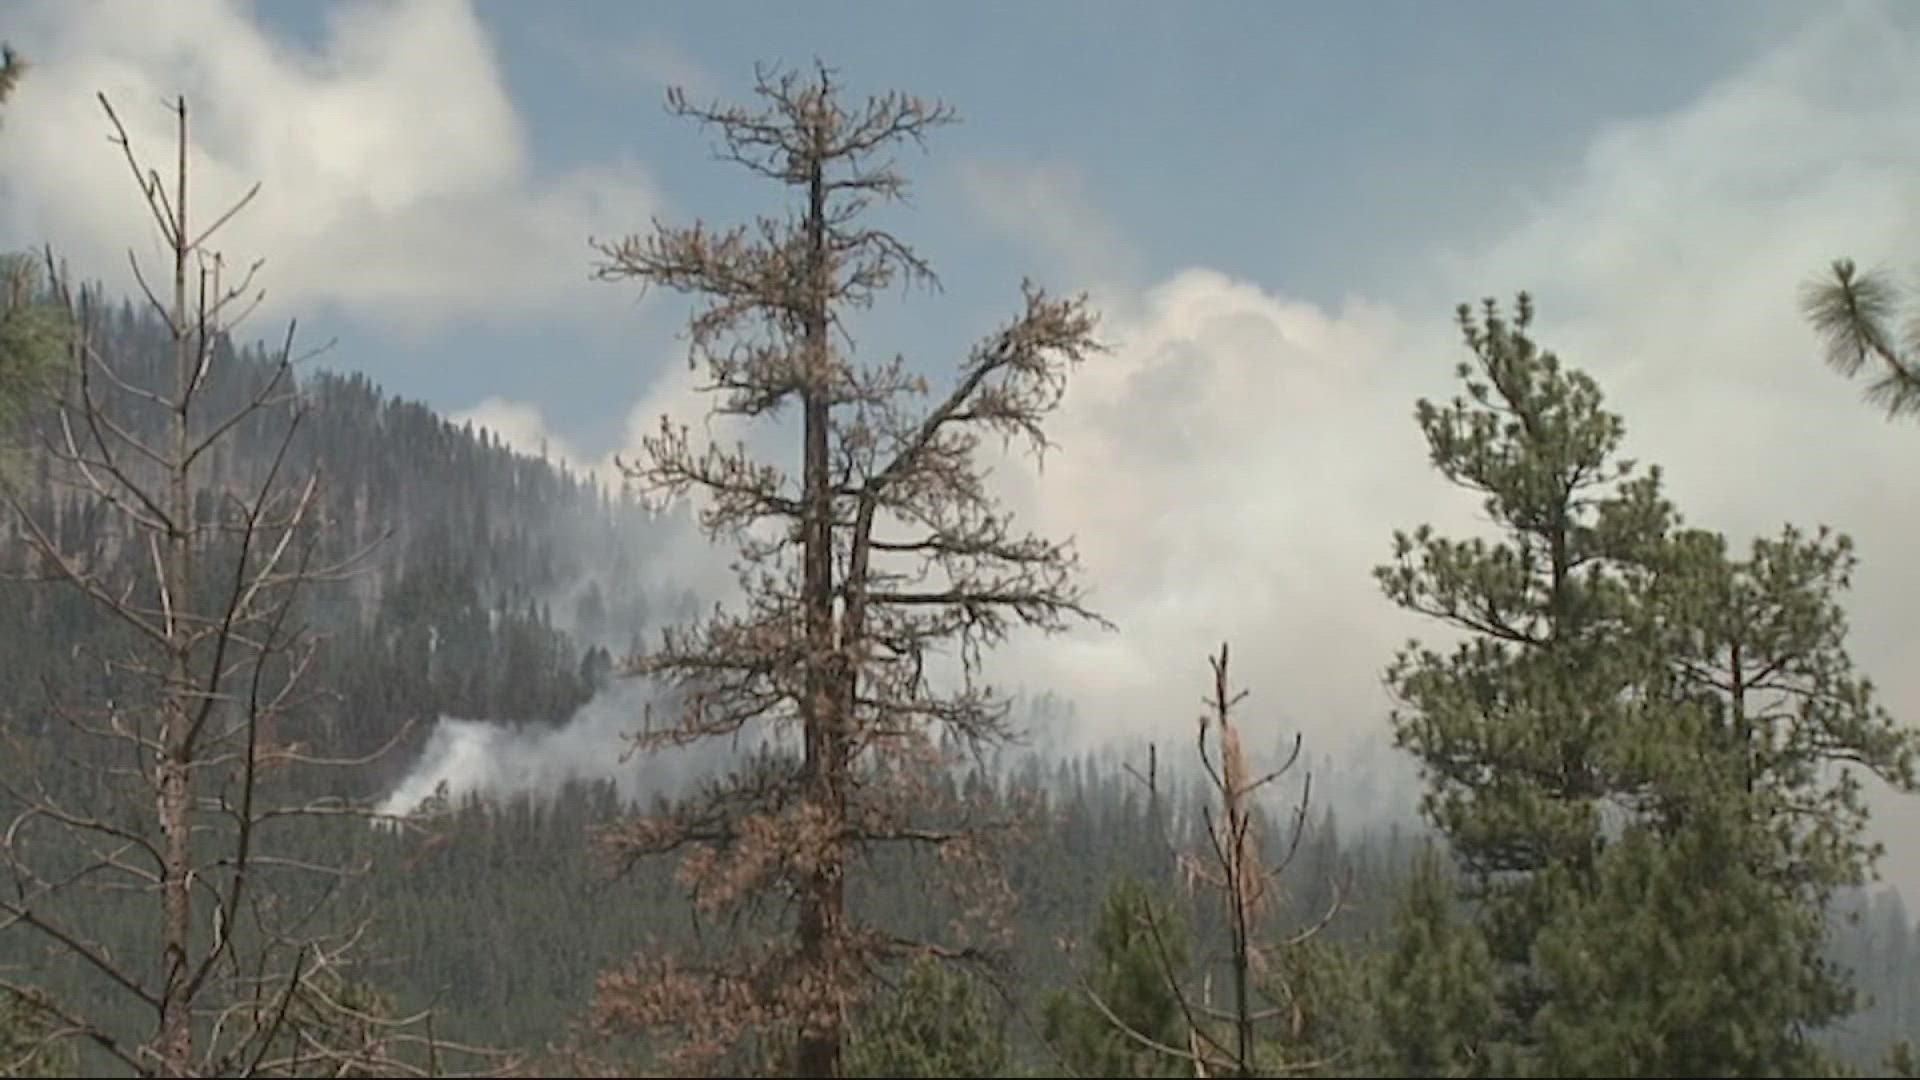 The Nakia Creek Fire is burning near Larch Mountain in a remote area of Clark County in Southwest Washington.